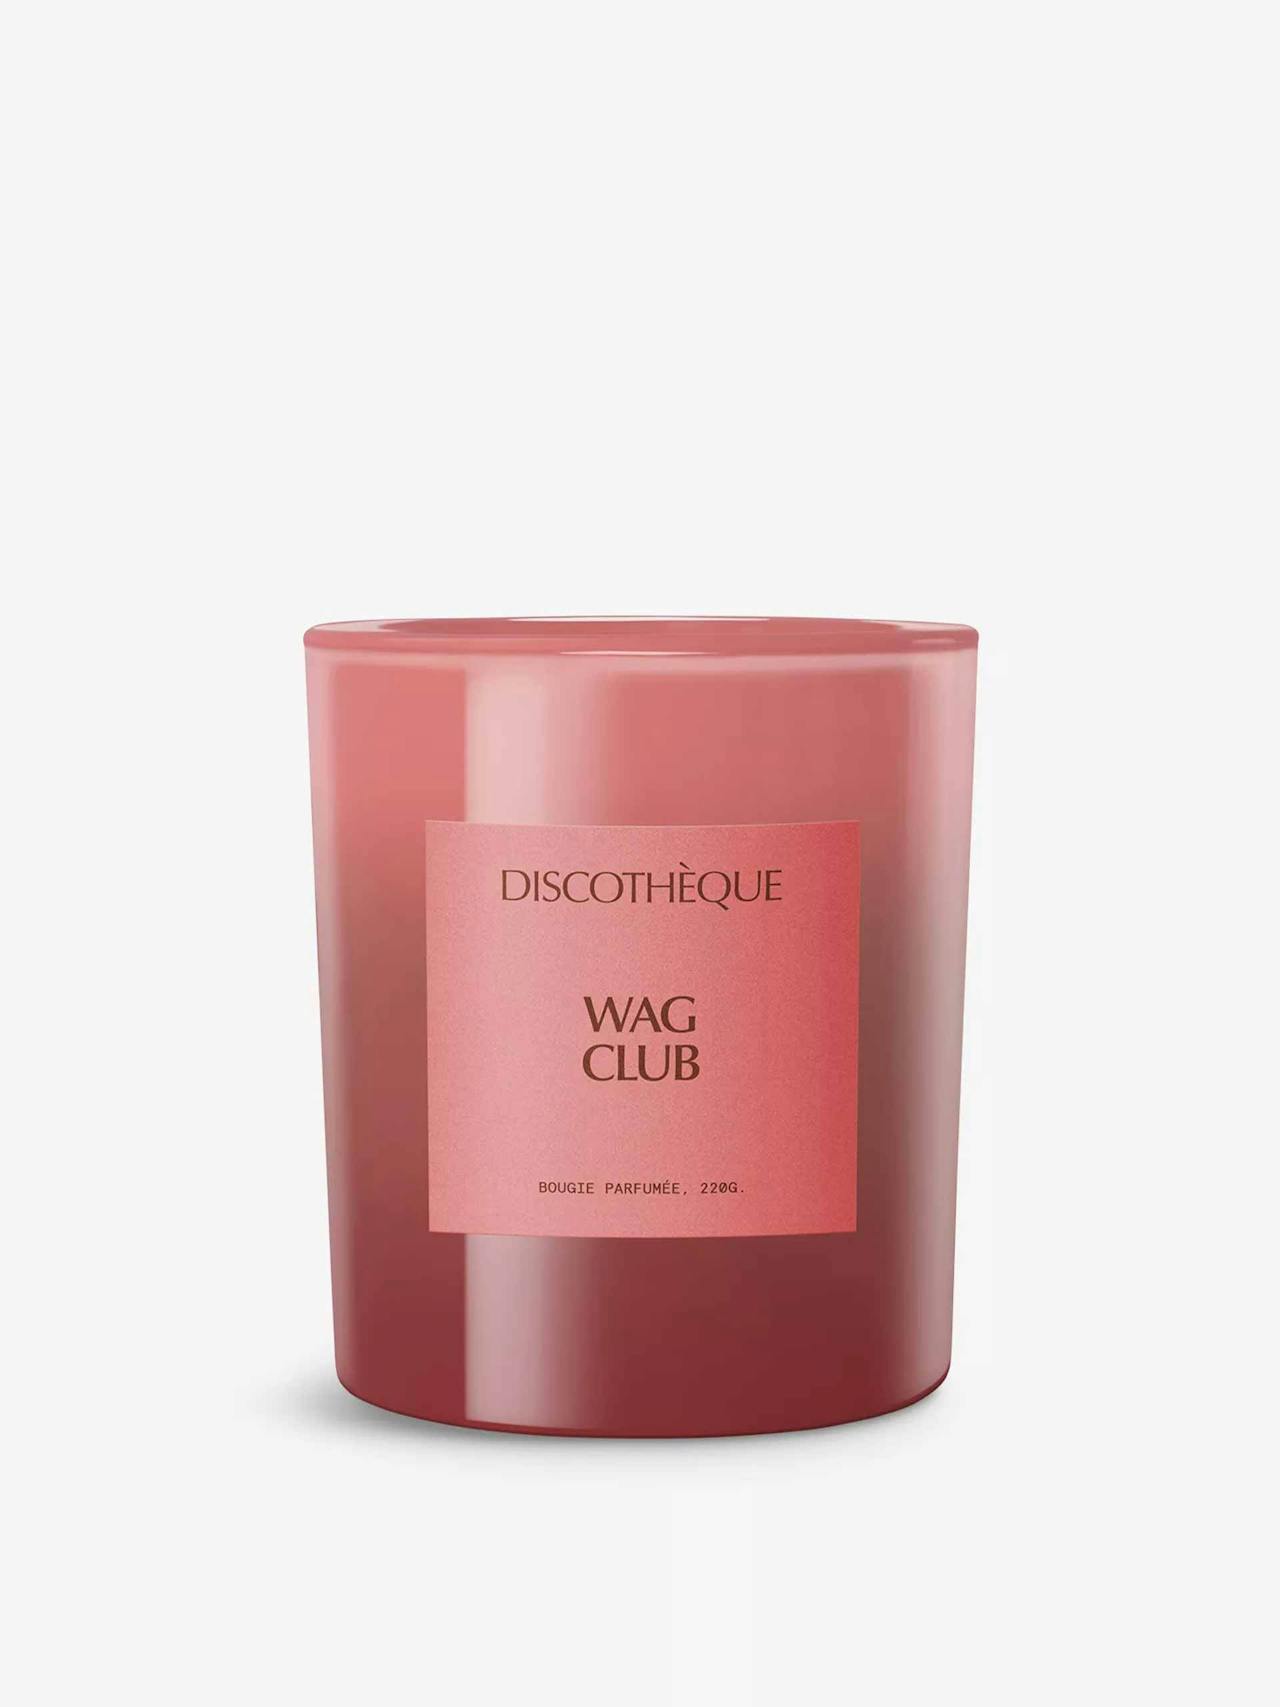 Wag Club wax scented candle